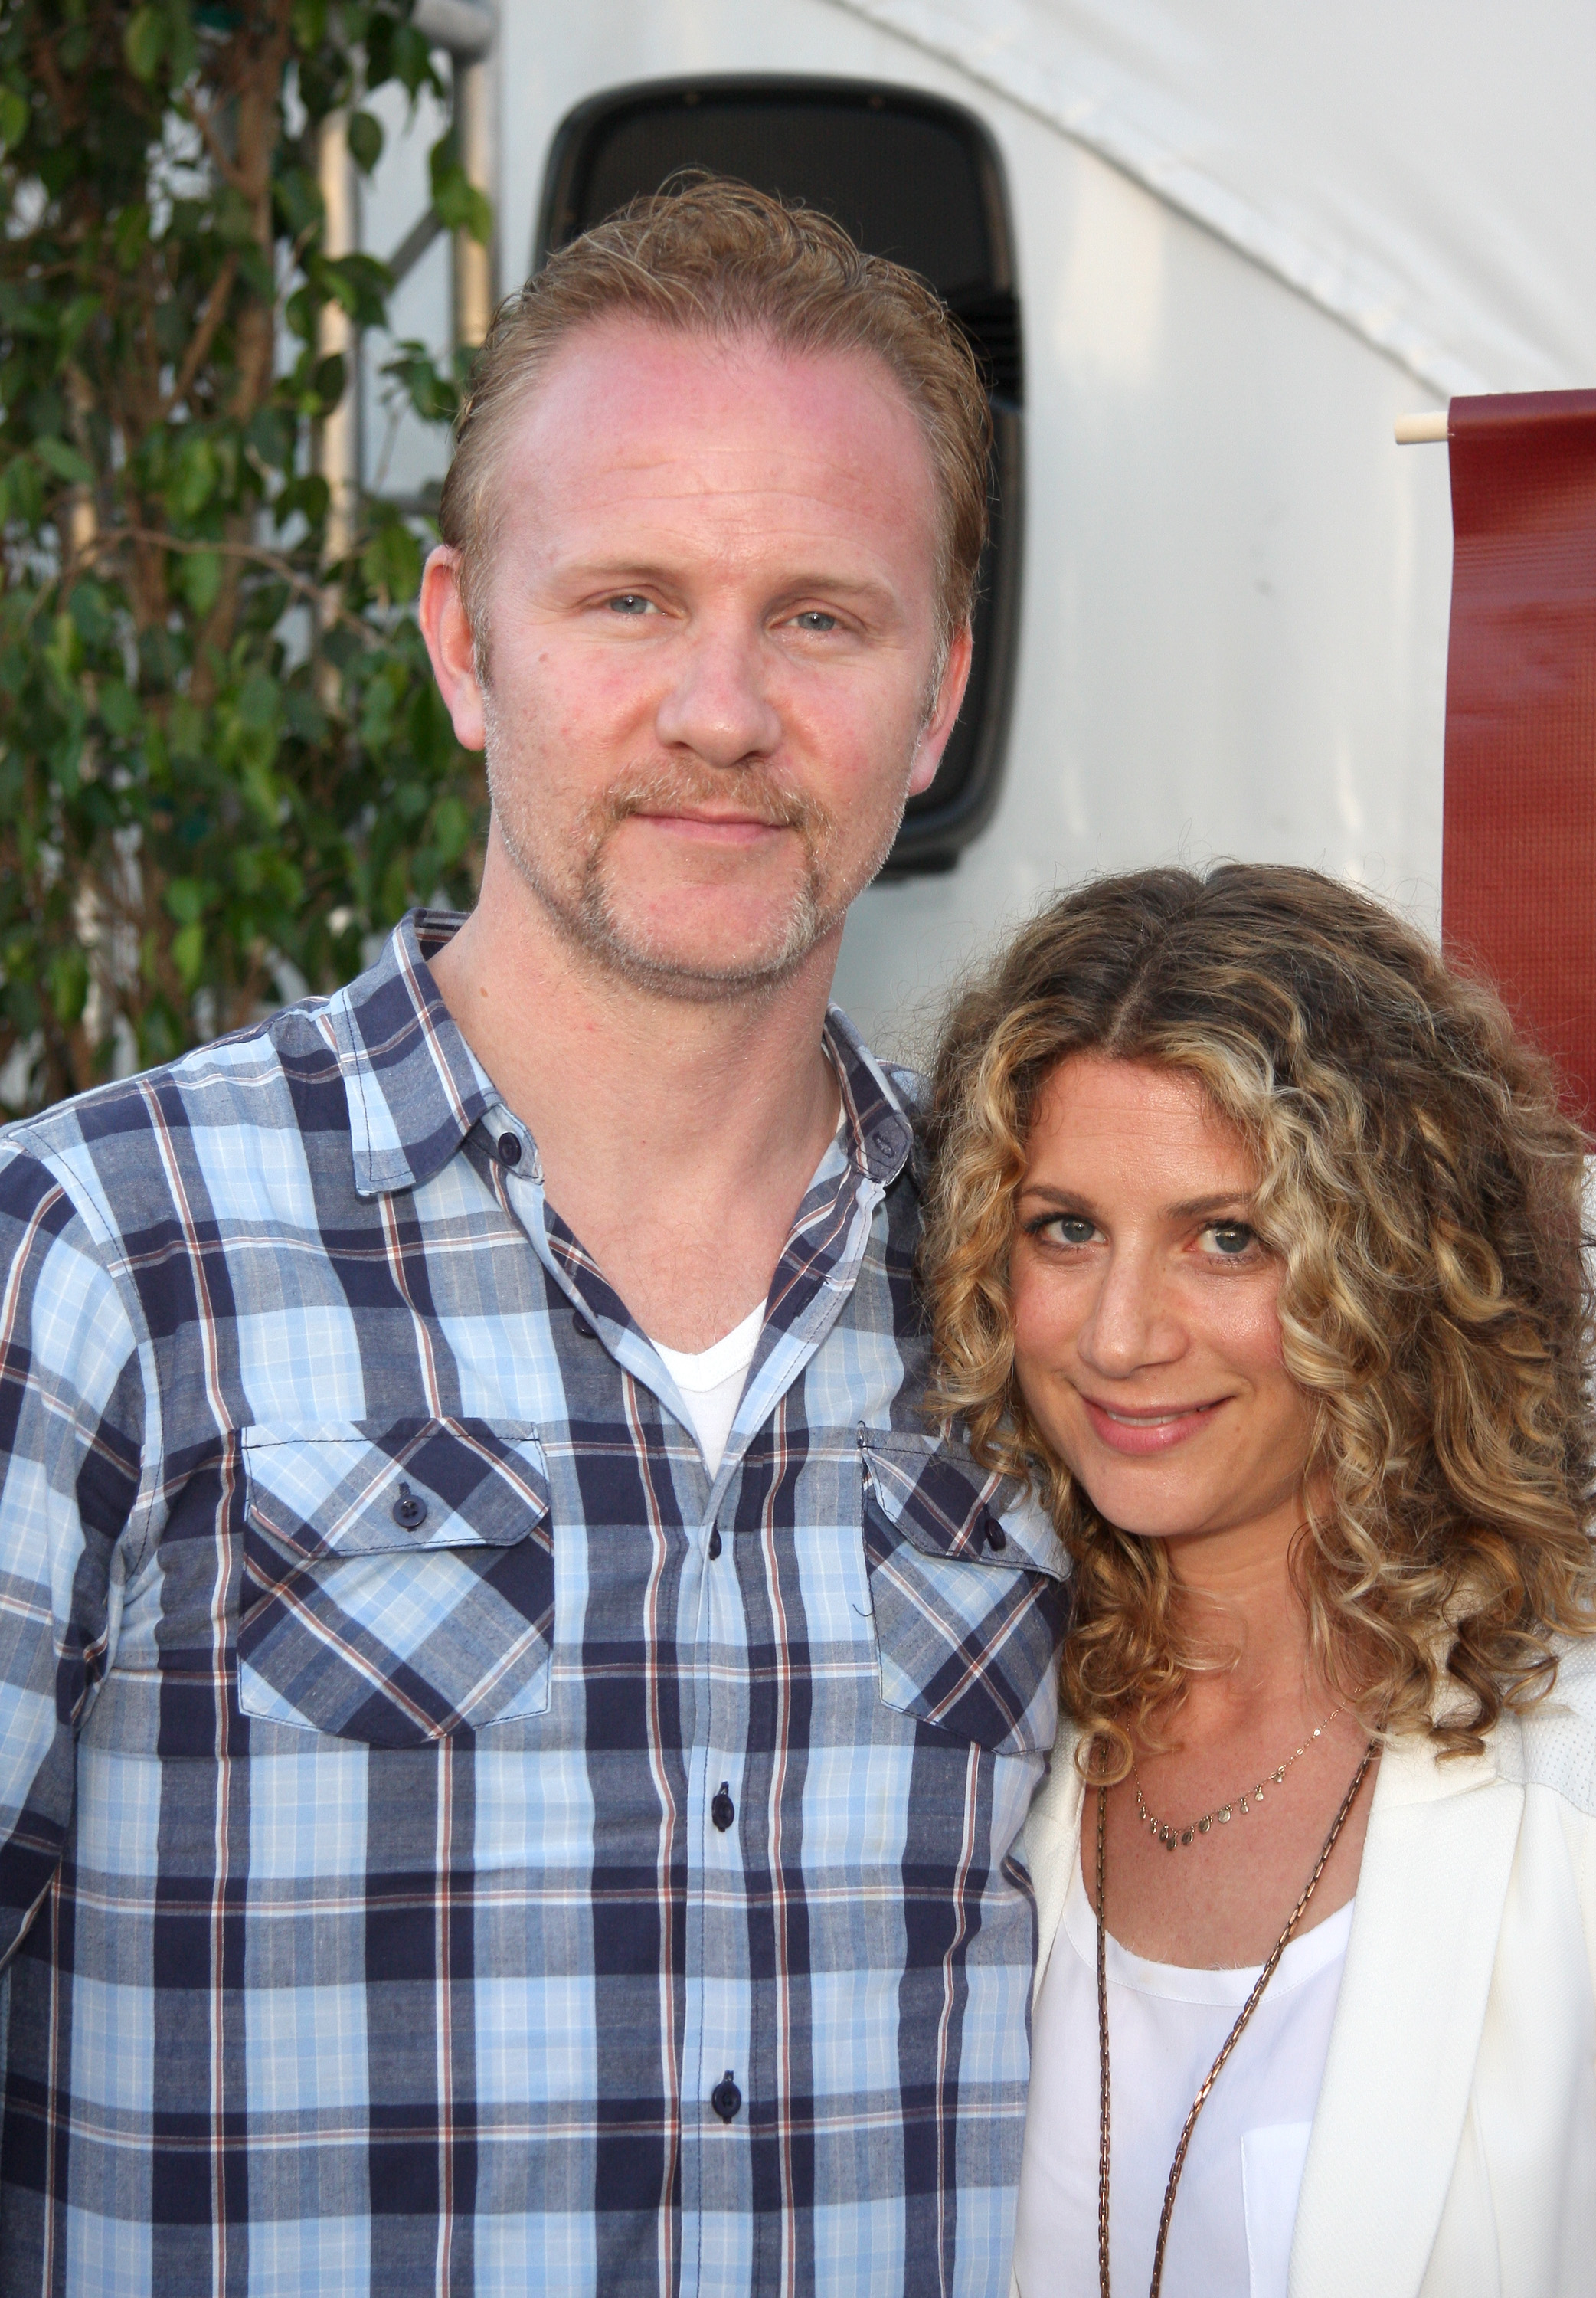 Morgan Spurlock and Sara Bernstein at the HBO Docs Reception during the 2013 Los Angeles Film Festival in Los Angeles, California, on June 16, 2013